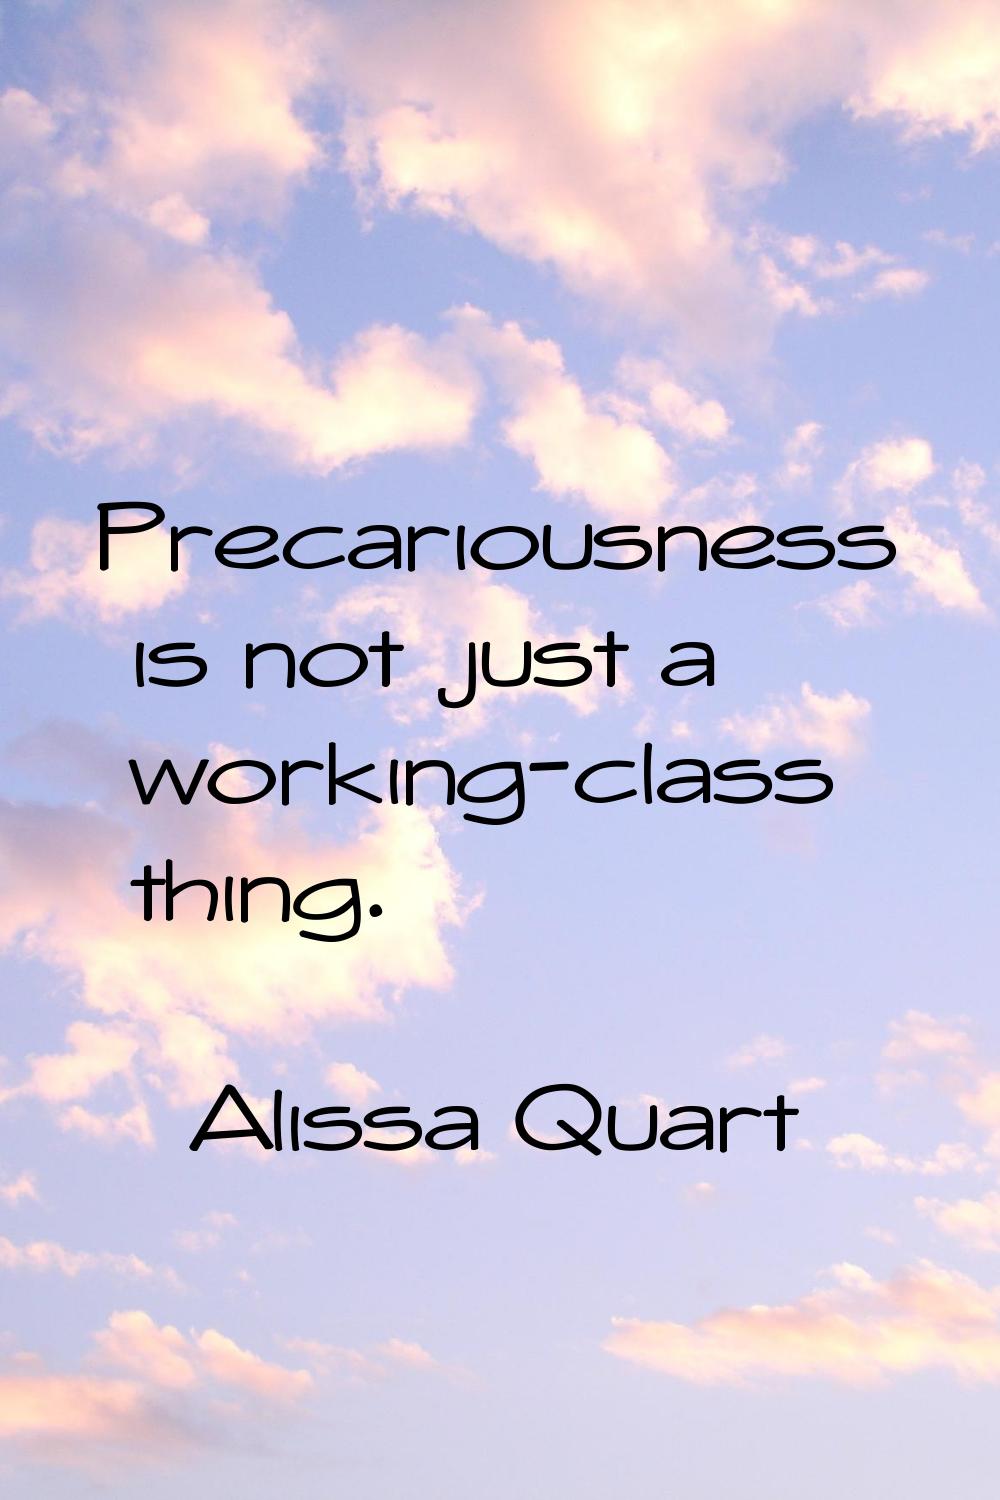 Precariousness is not just a working-class thing.